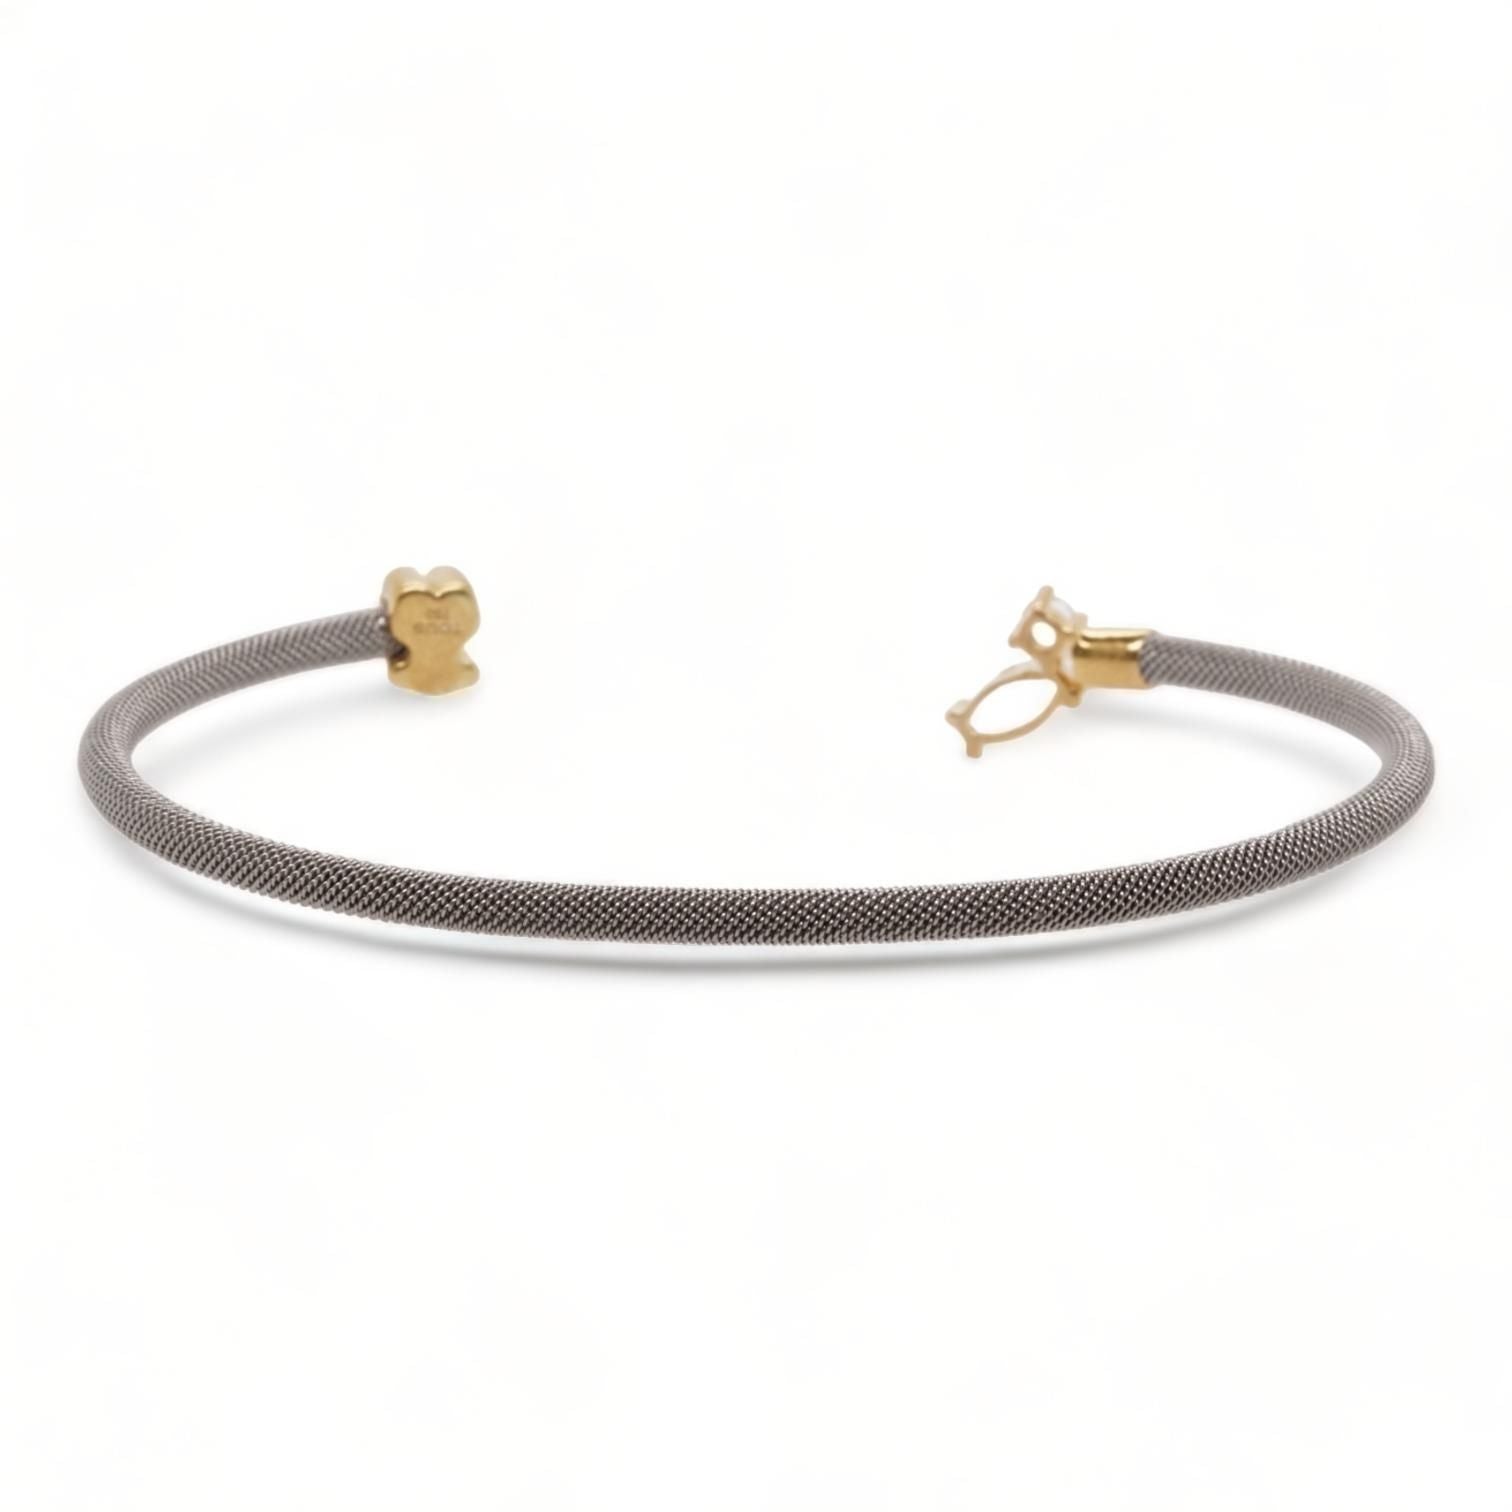 Louis Vuitton - Authenticated Bracelet - Metal Gold for Women, Very Good Condition